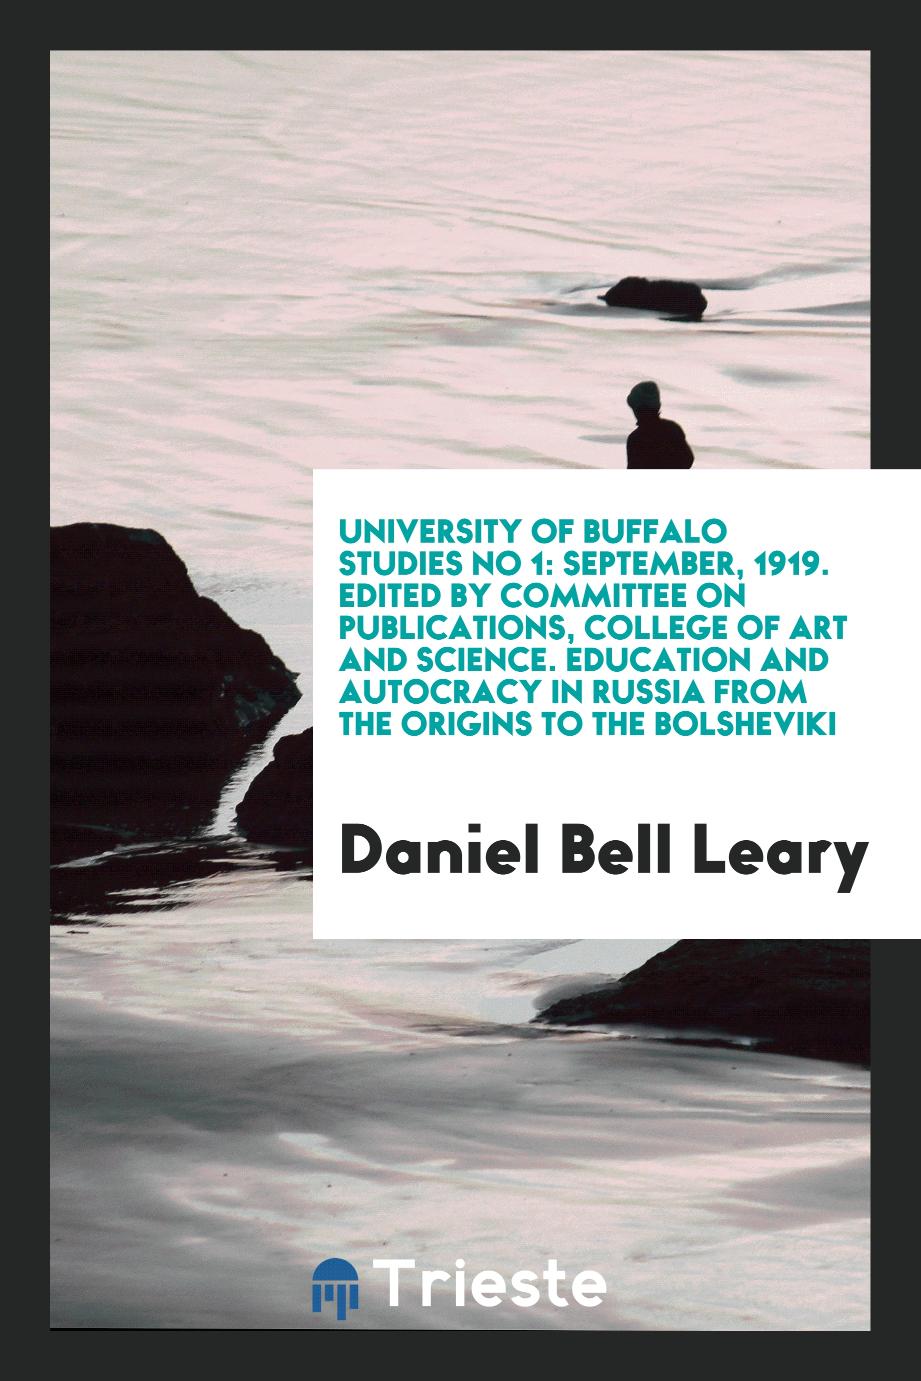 University of Buffalo Studies No 1: September, 1919. Edited by Committee on Publications, College of Art and Science. Education and Autocracy in Russia from the Origins to the Bolsheviki